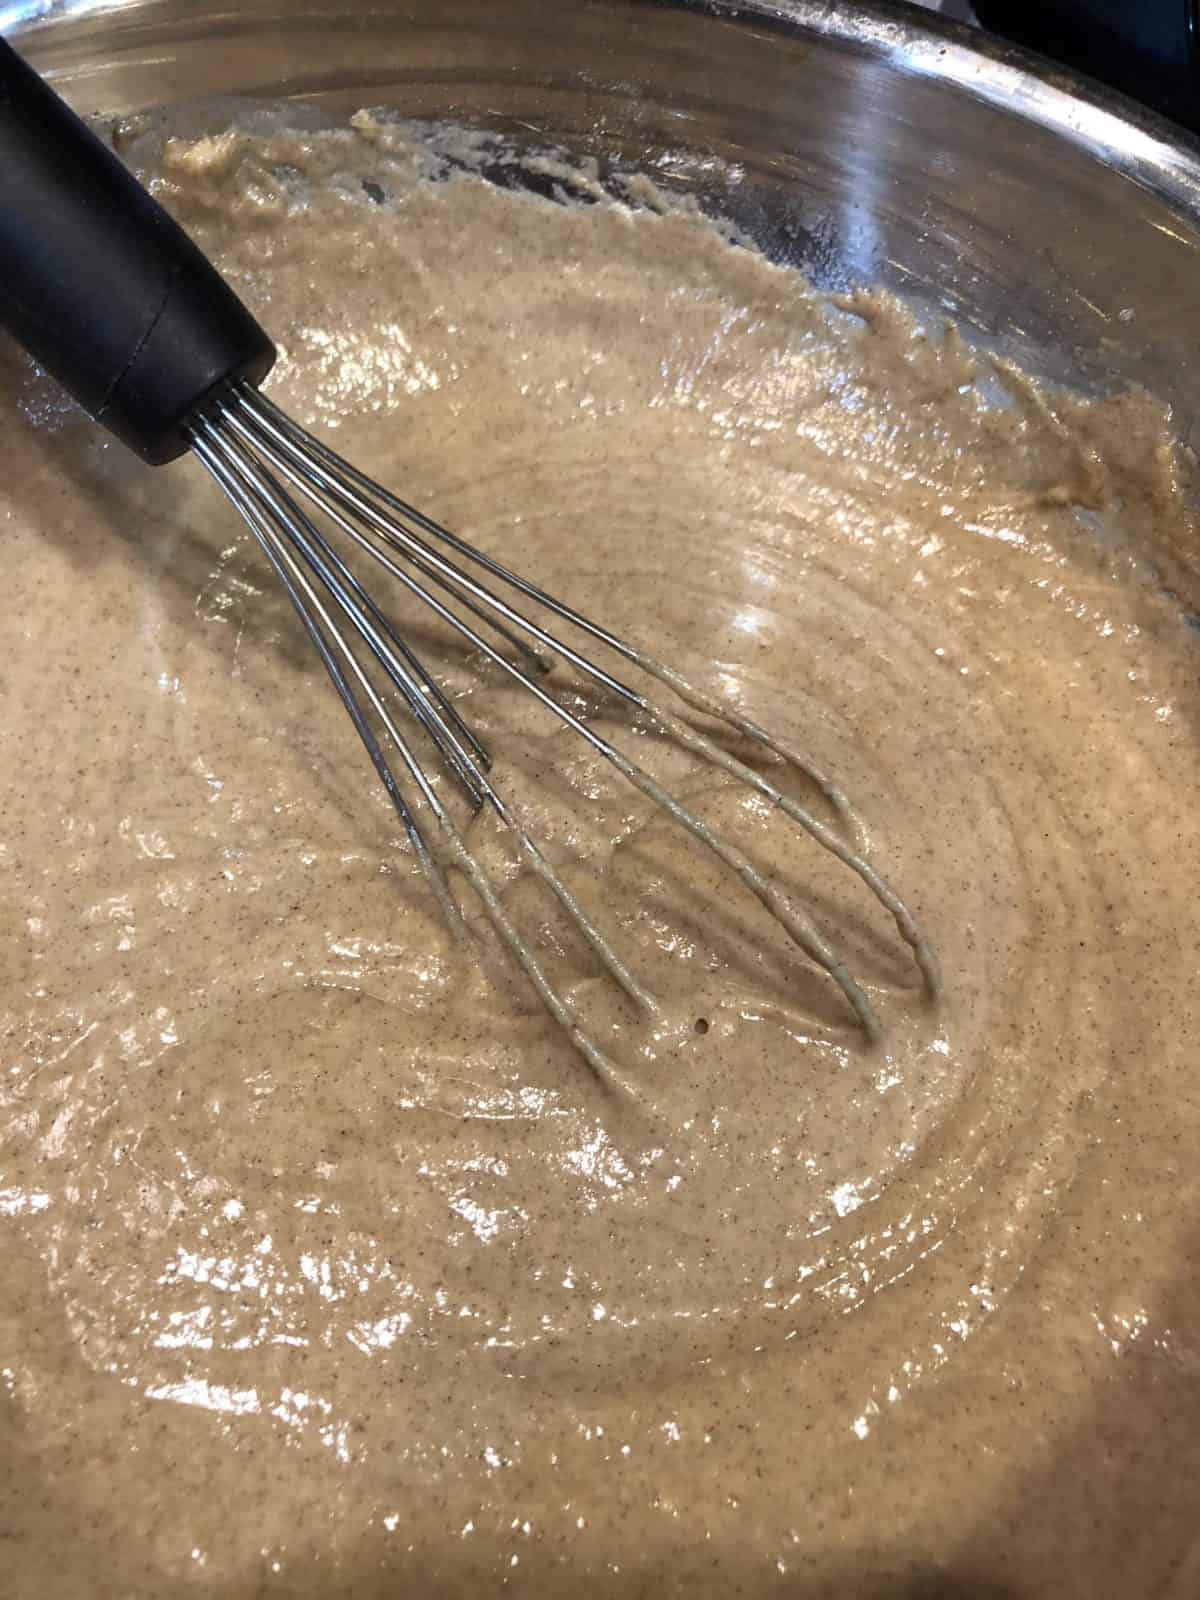 Mixing Muffin Batter